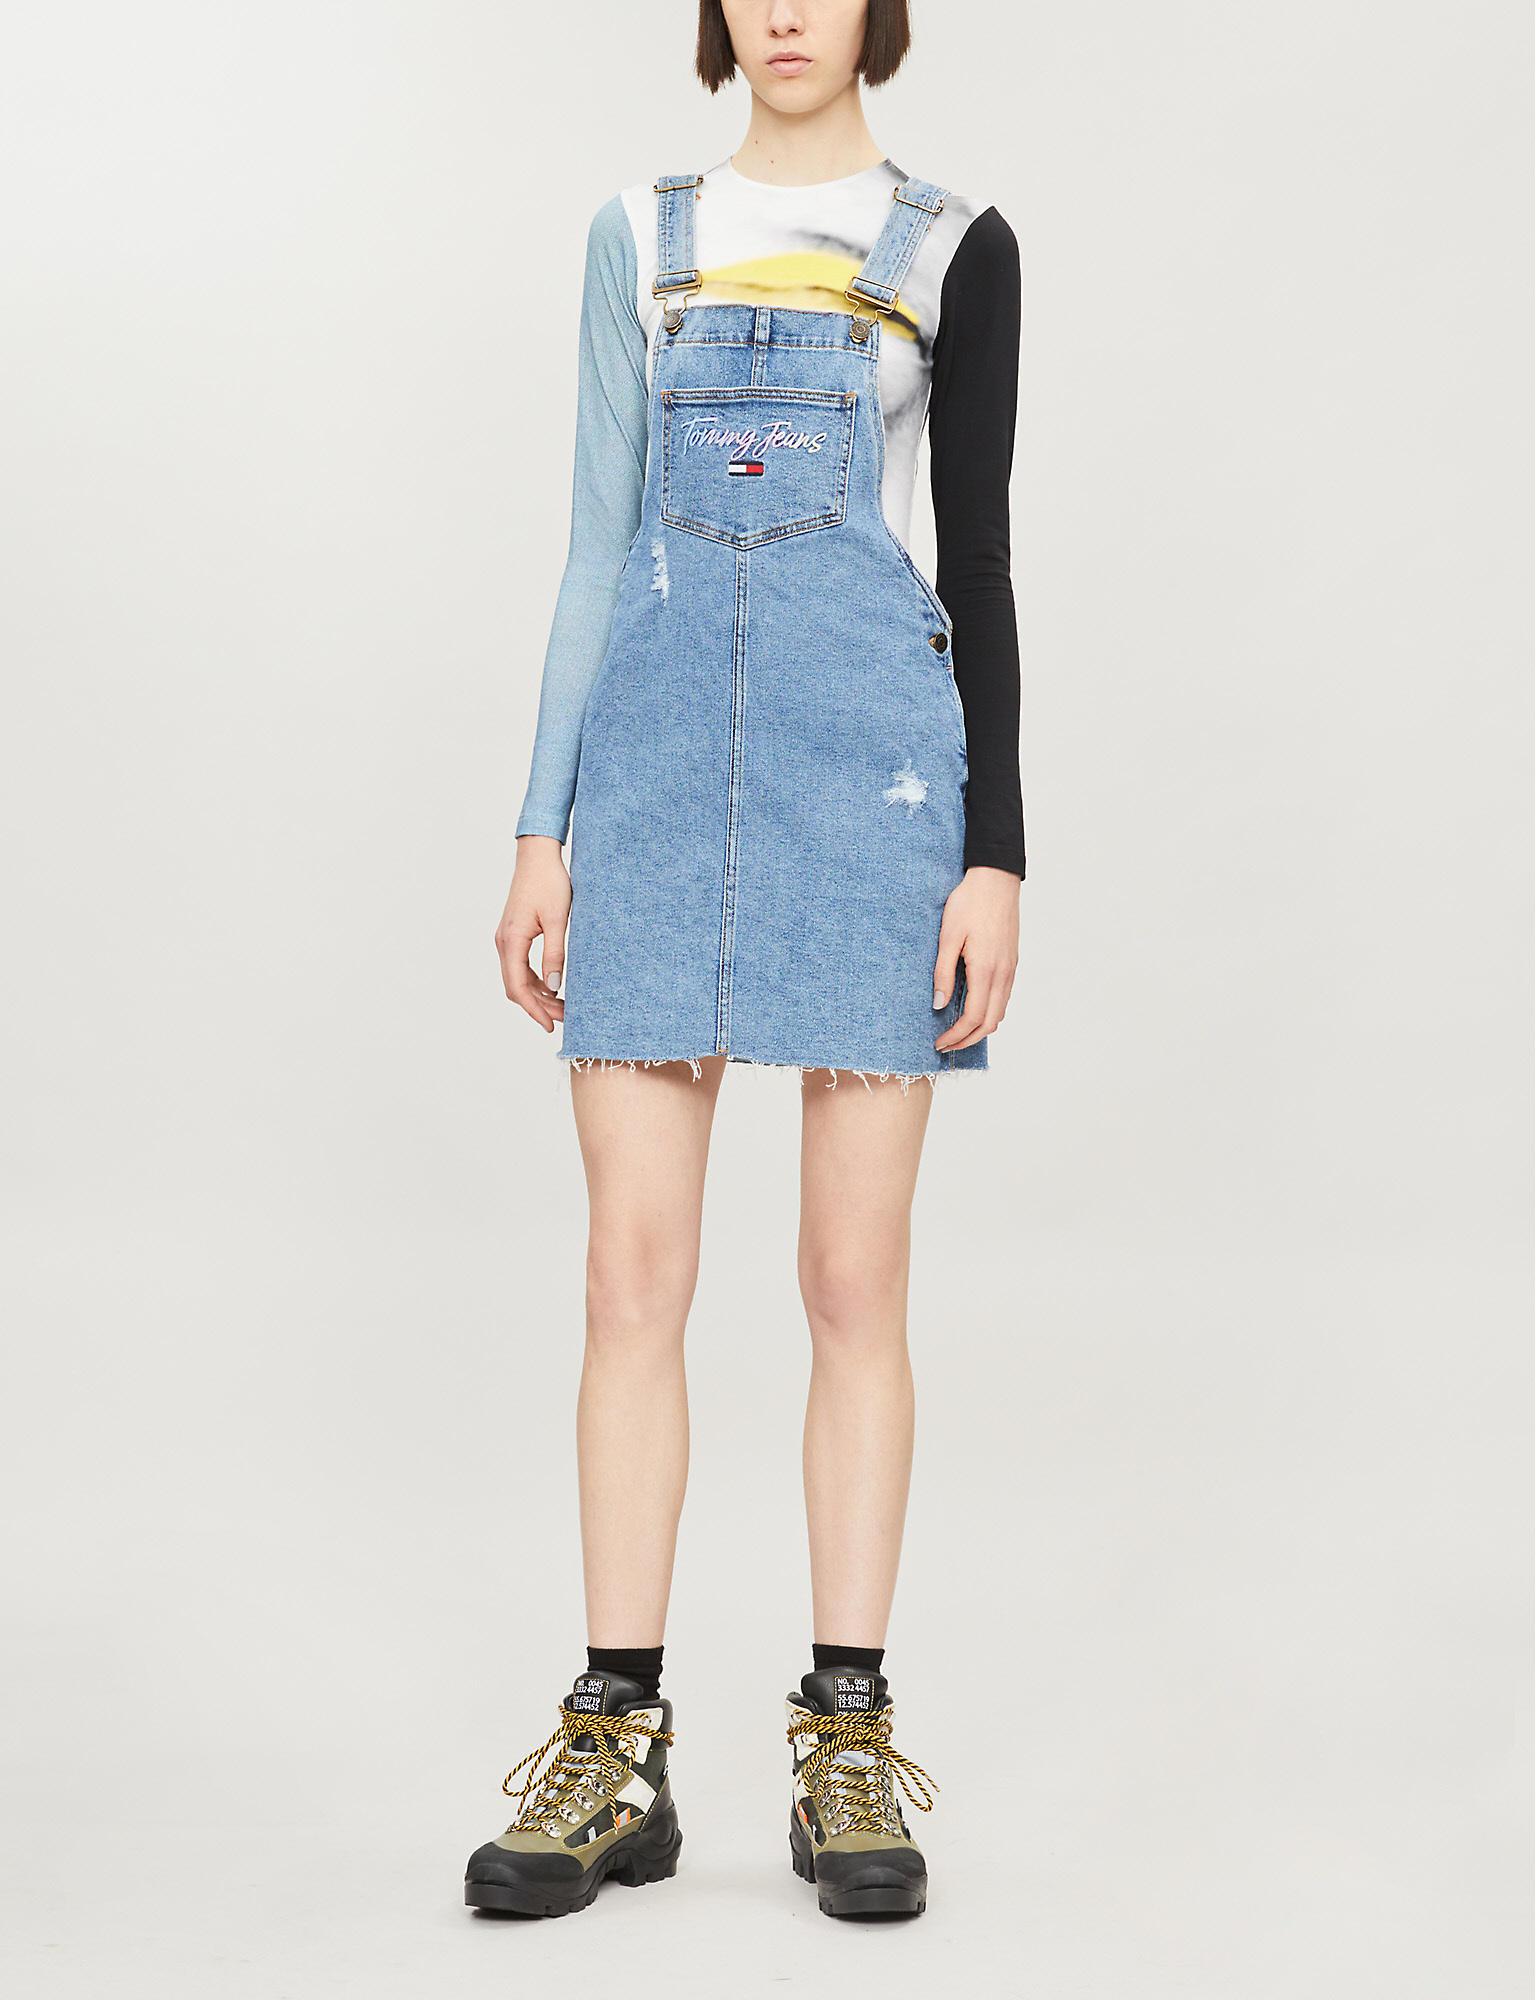 tommy jeans overall dress